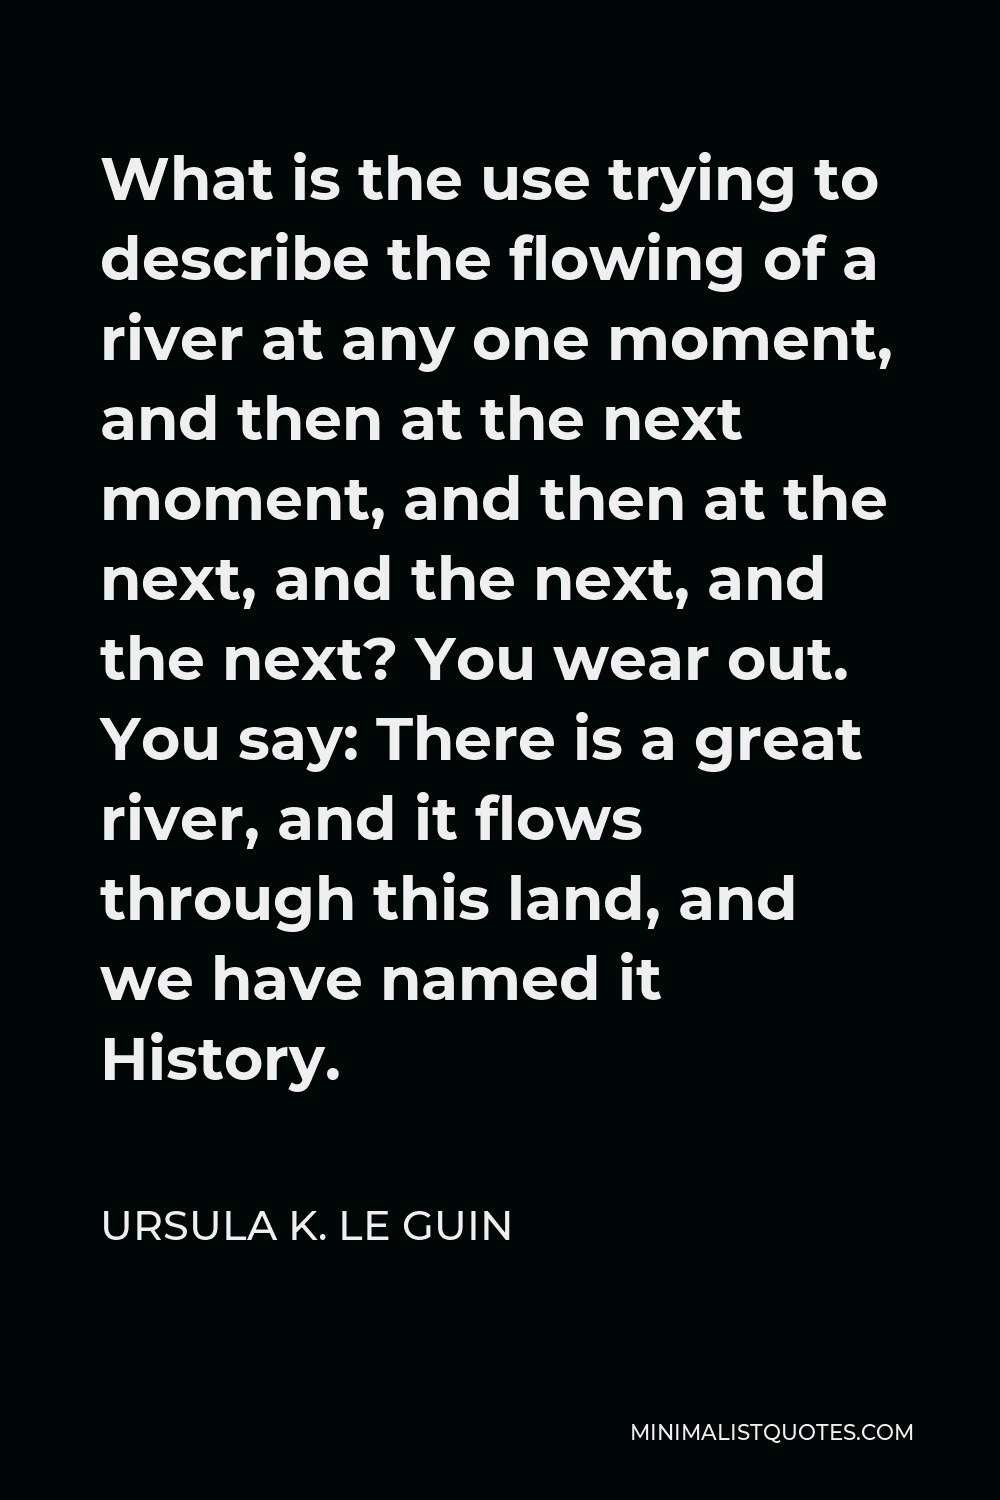 Ursula K. Le Guin Quote - What is the use trying to describe the flowing of a river at any one moment, and then at the next moment, and then at the next, and the next, and the next? You wear out. You say: There is a great river, and it flows through this land, and we have named it History.